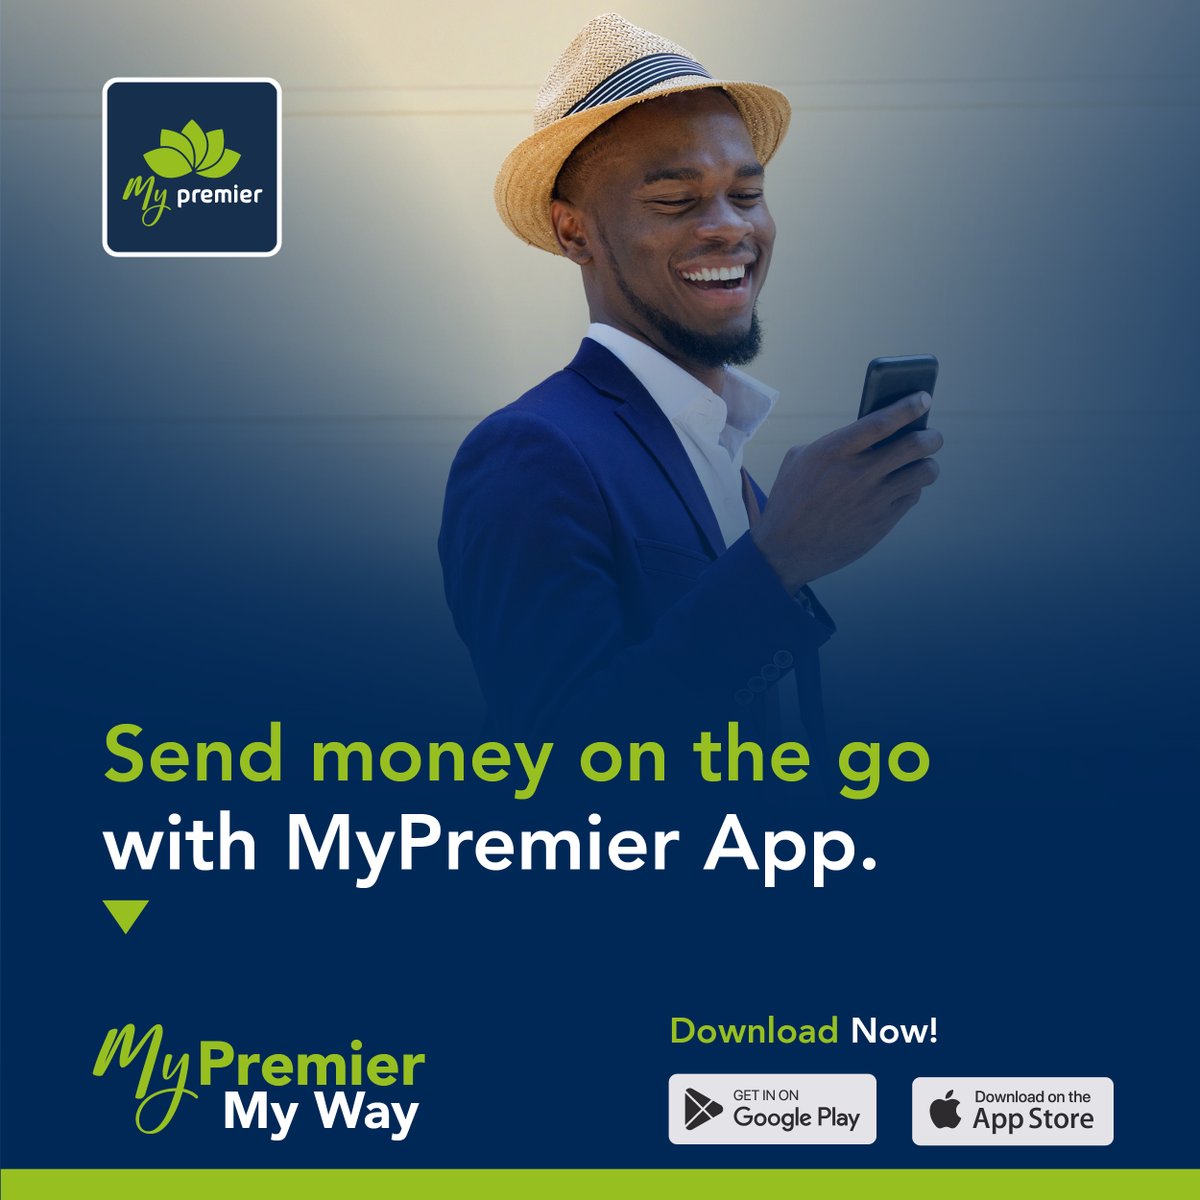 Download the mobile banking app that moves with you , send and receive money anywhere using My Premier App. Try out the app today, available for download on Google Play Store and Apple App Store. #MyPremierMyWay #PremierBank #ShariahCompliant